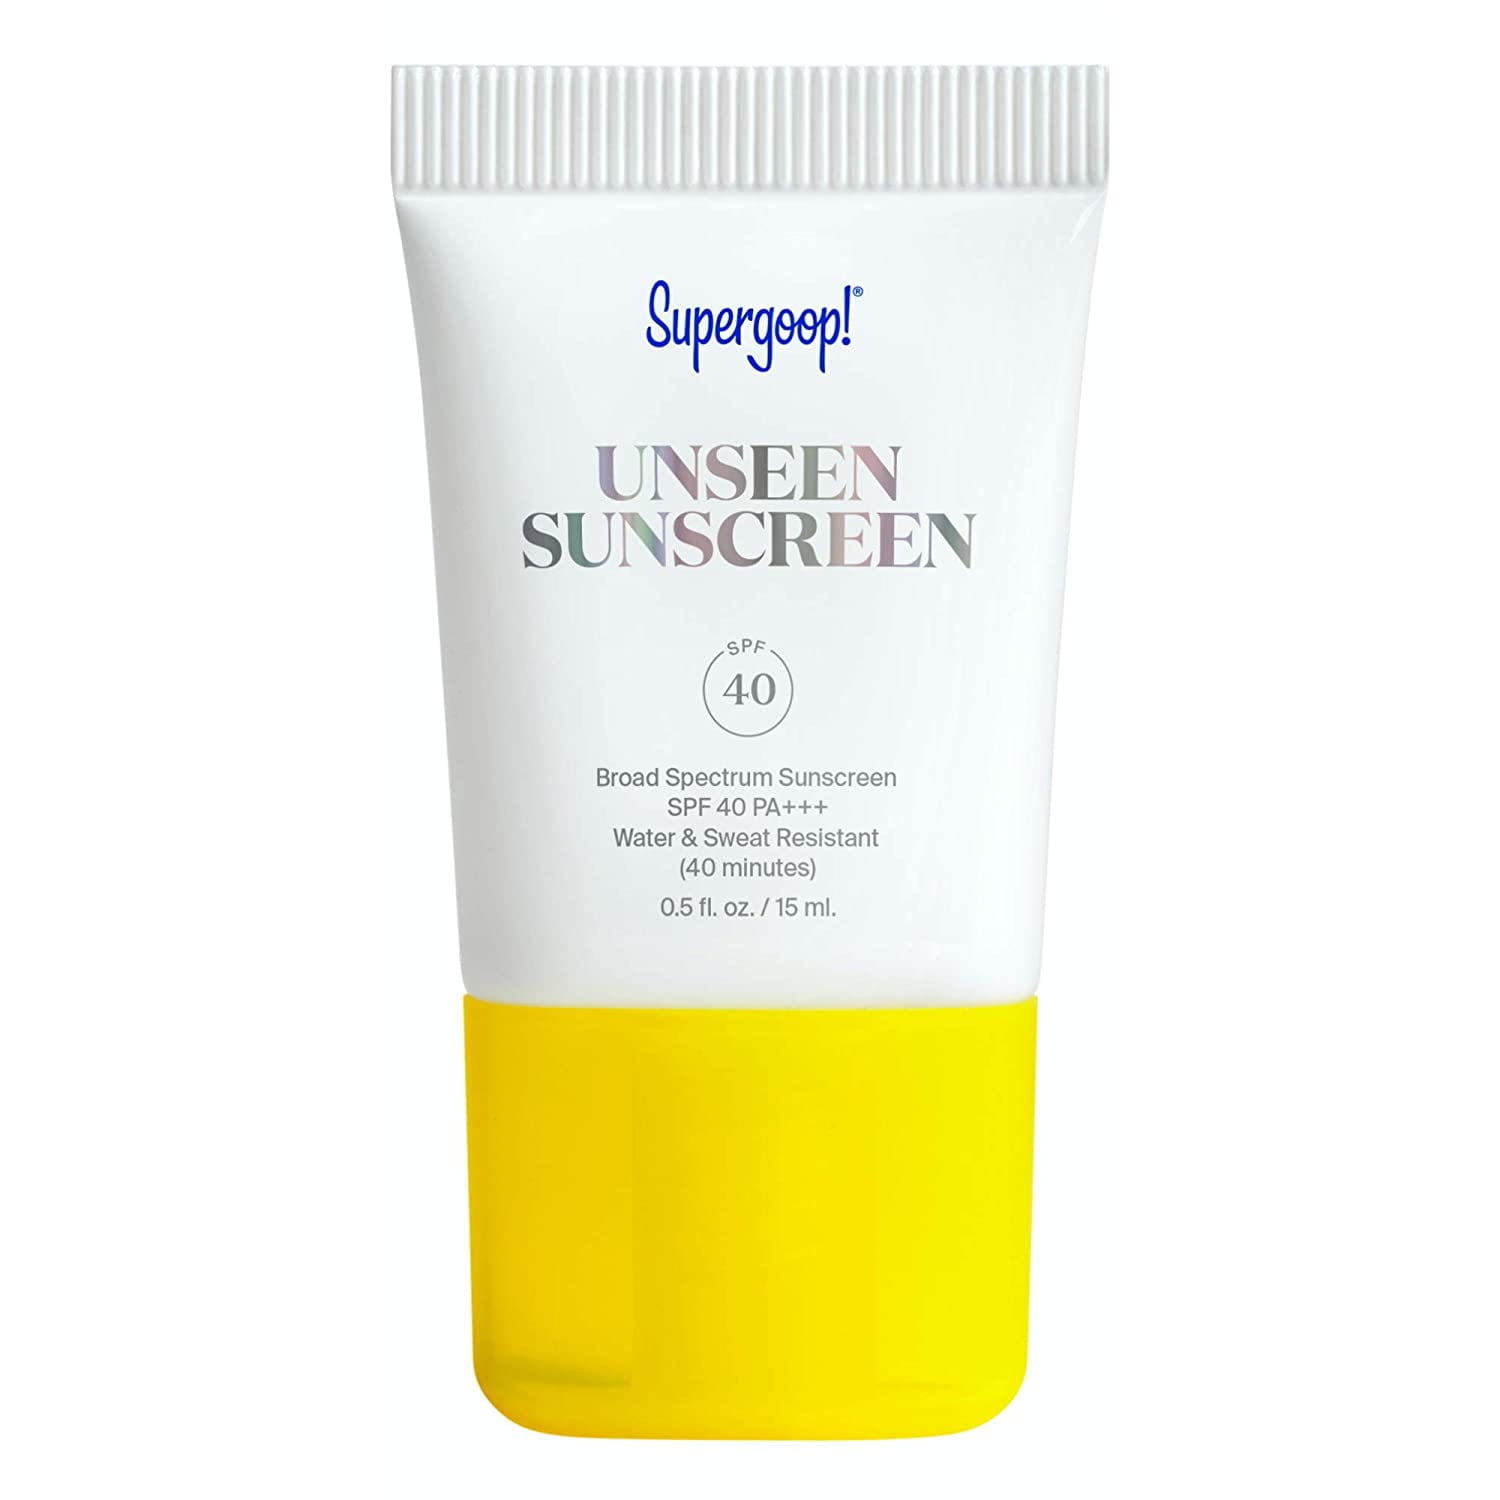 Supergoop! Unseen Sunscreen SPF 40, 0.5 oz - Oil-Free, Weightless & Invisible Broad Spectrum Face Sunscreen for All Skin Types - Scent-Free - Great Makeup - Beard-Friendly - Walmart.com